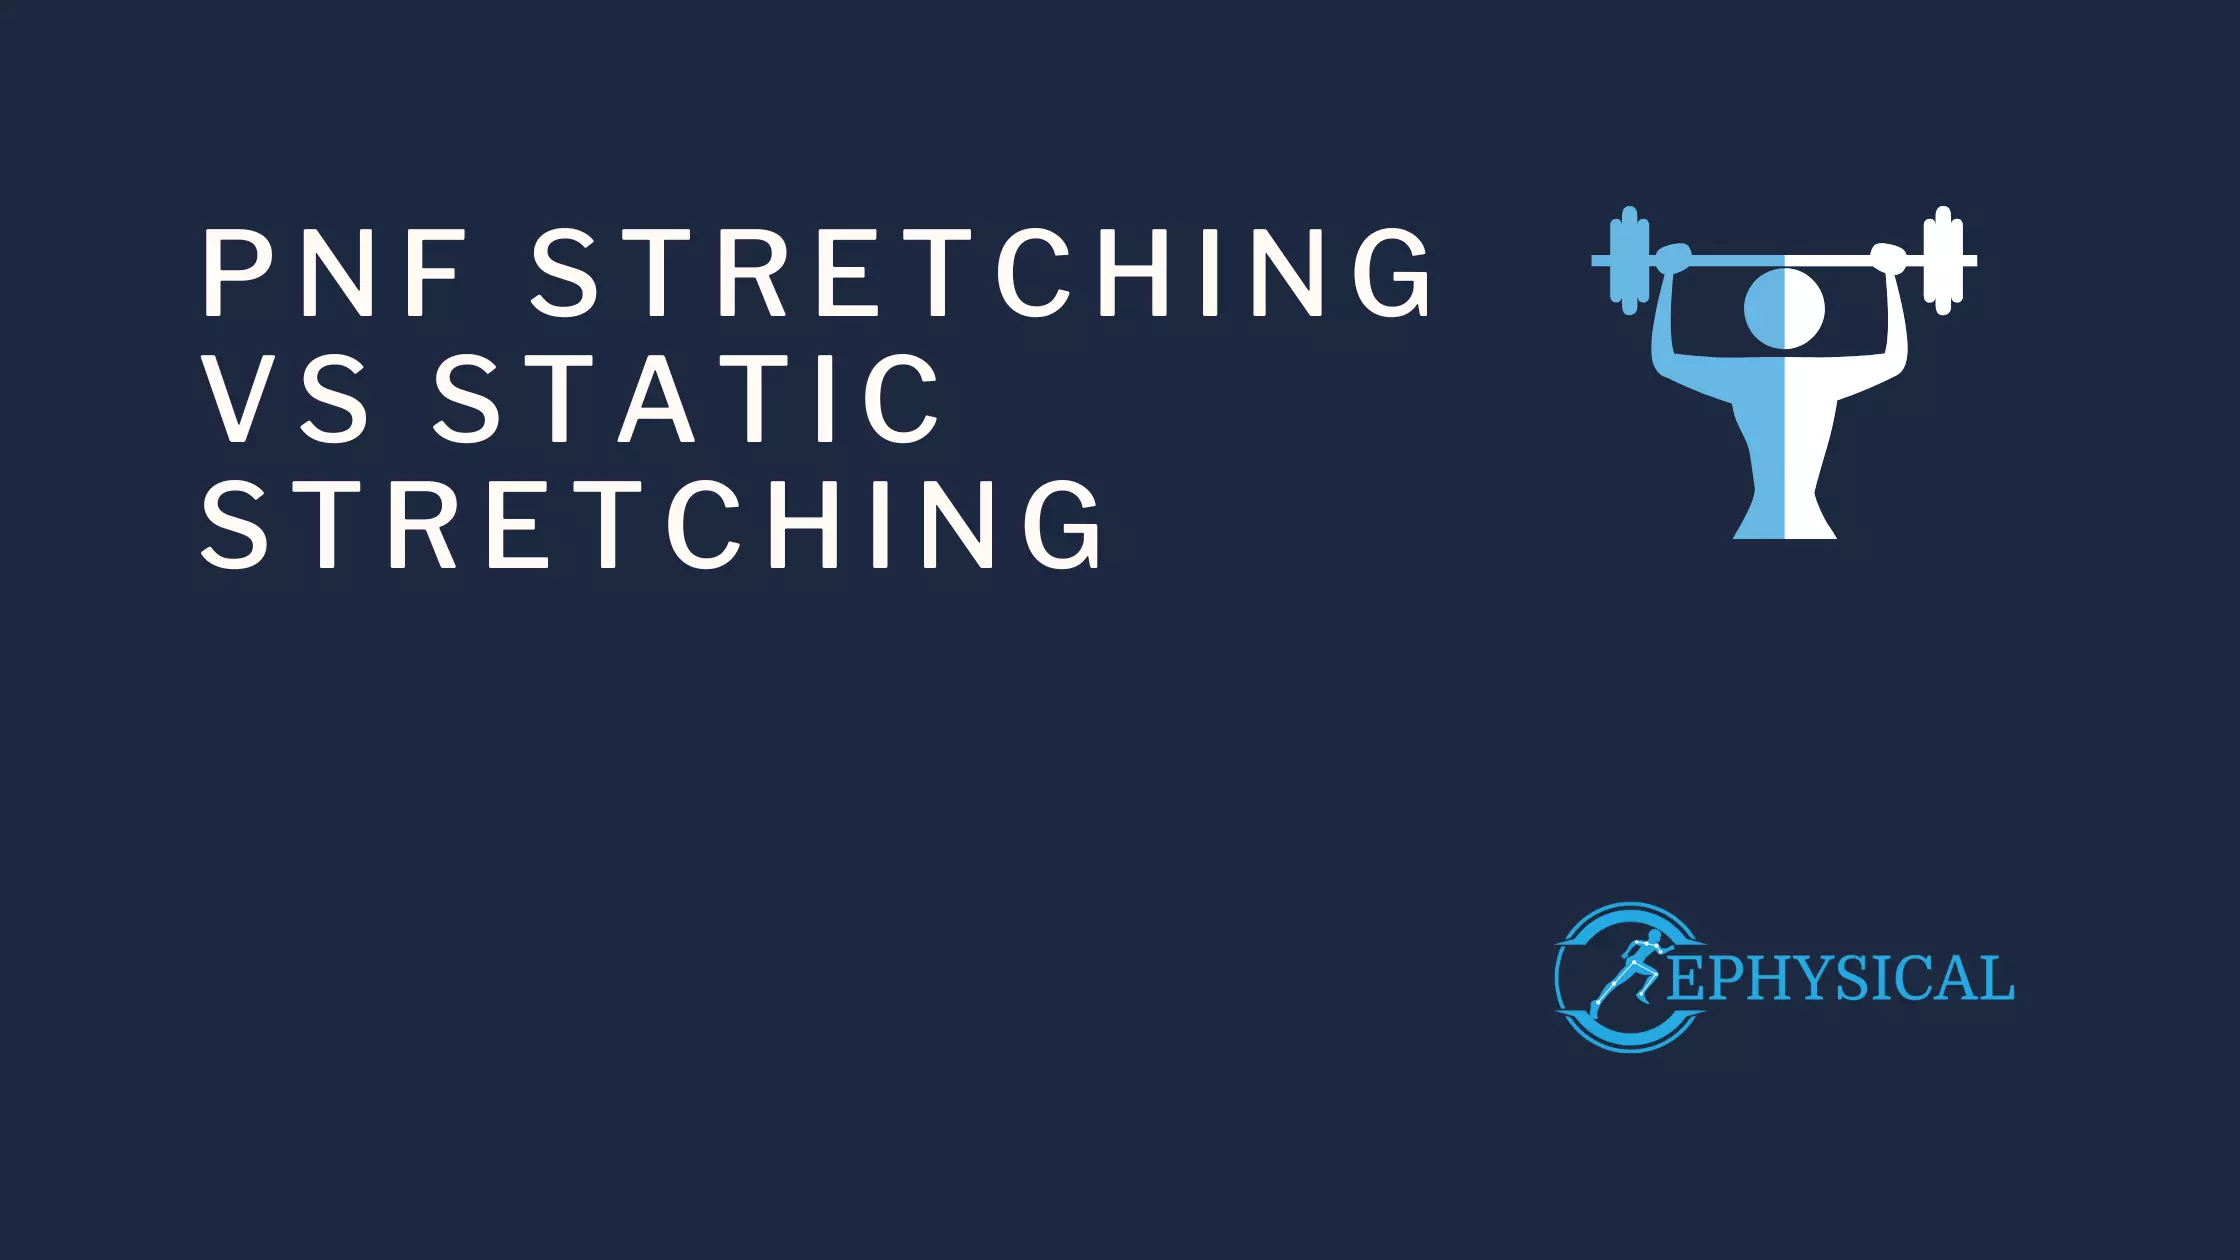 pnf stretching vs static stretching